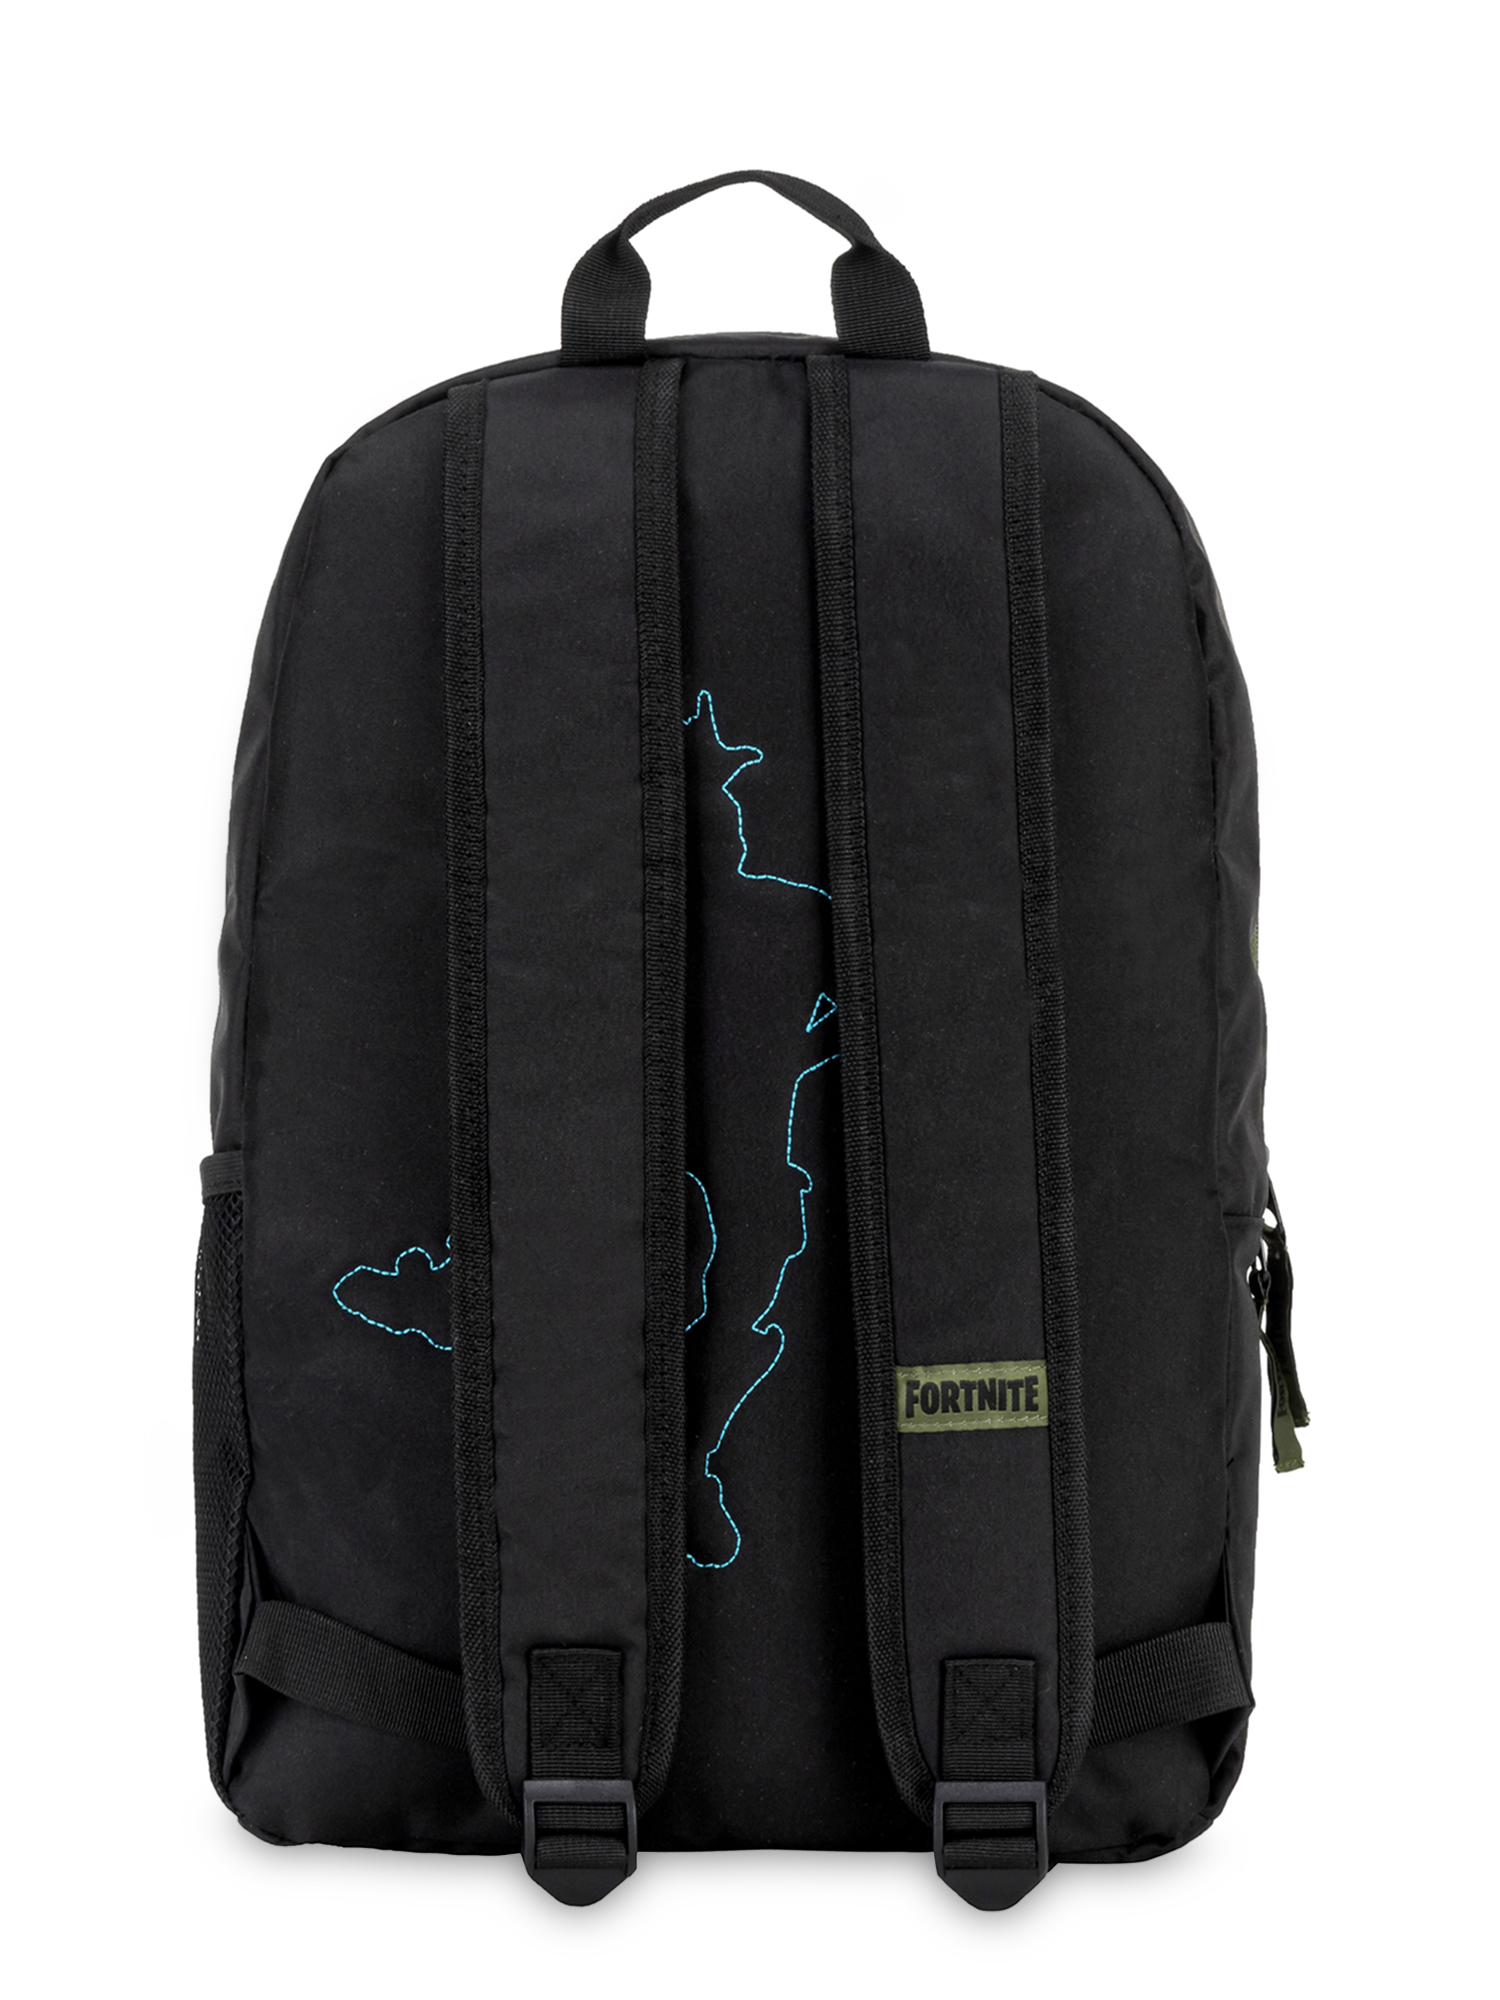 Fortnite Solidify Backpack - image 2 of 4